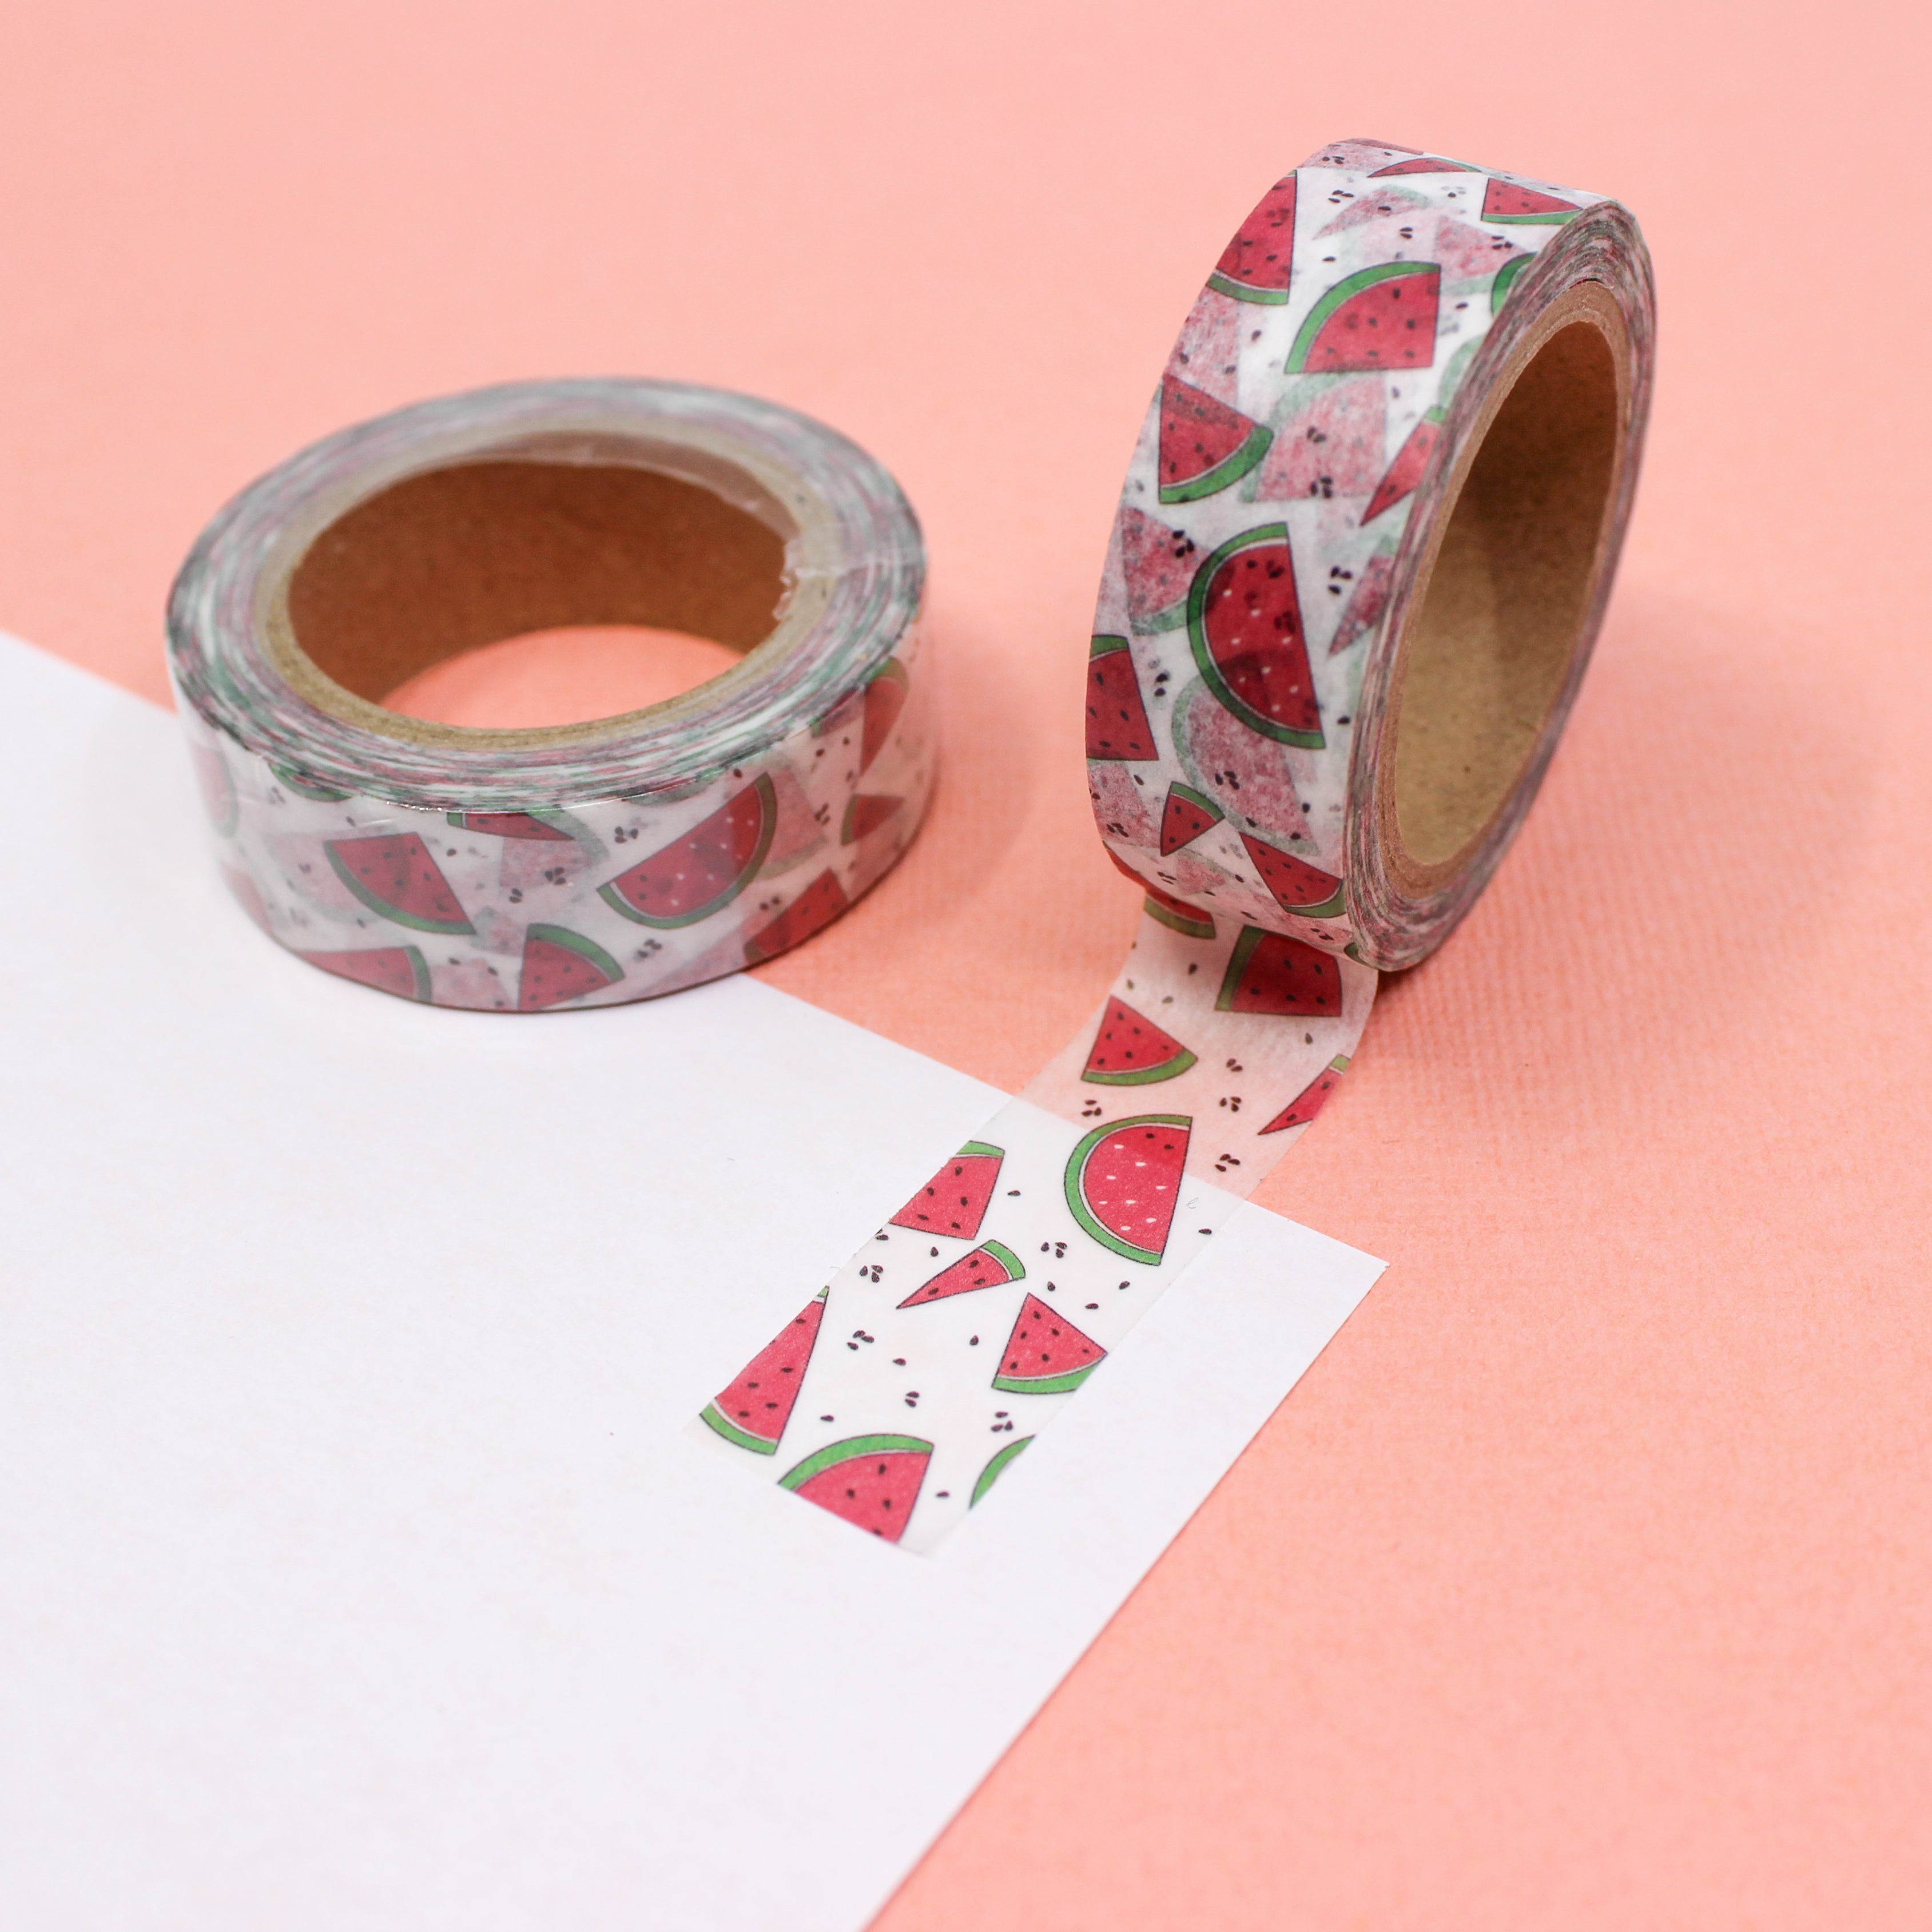 This is a watermelon tropical fruit collections pattern washi tape from BBB Supplies Craft Shop